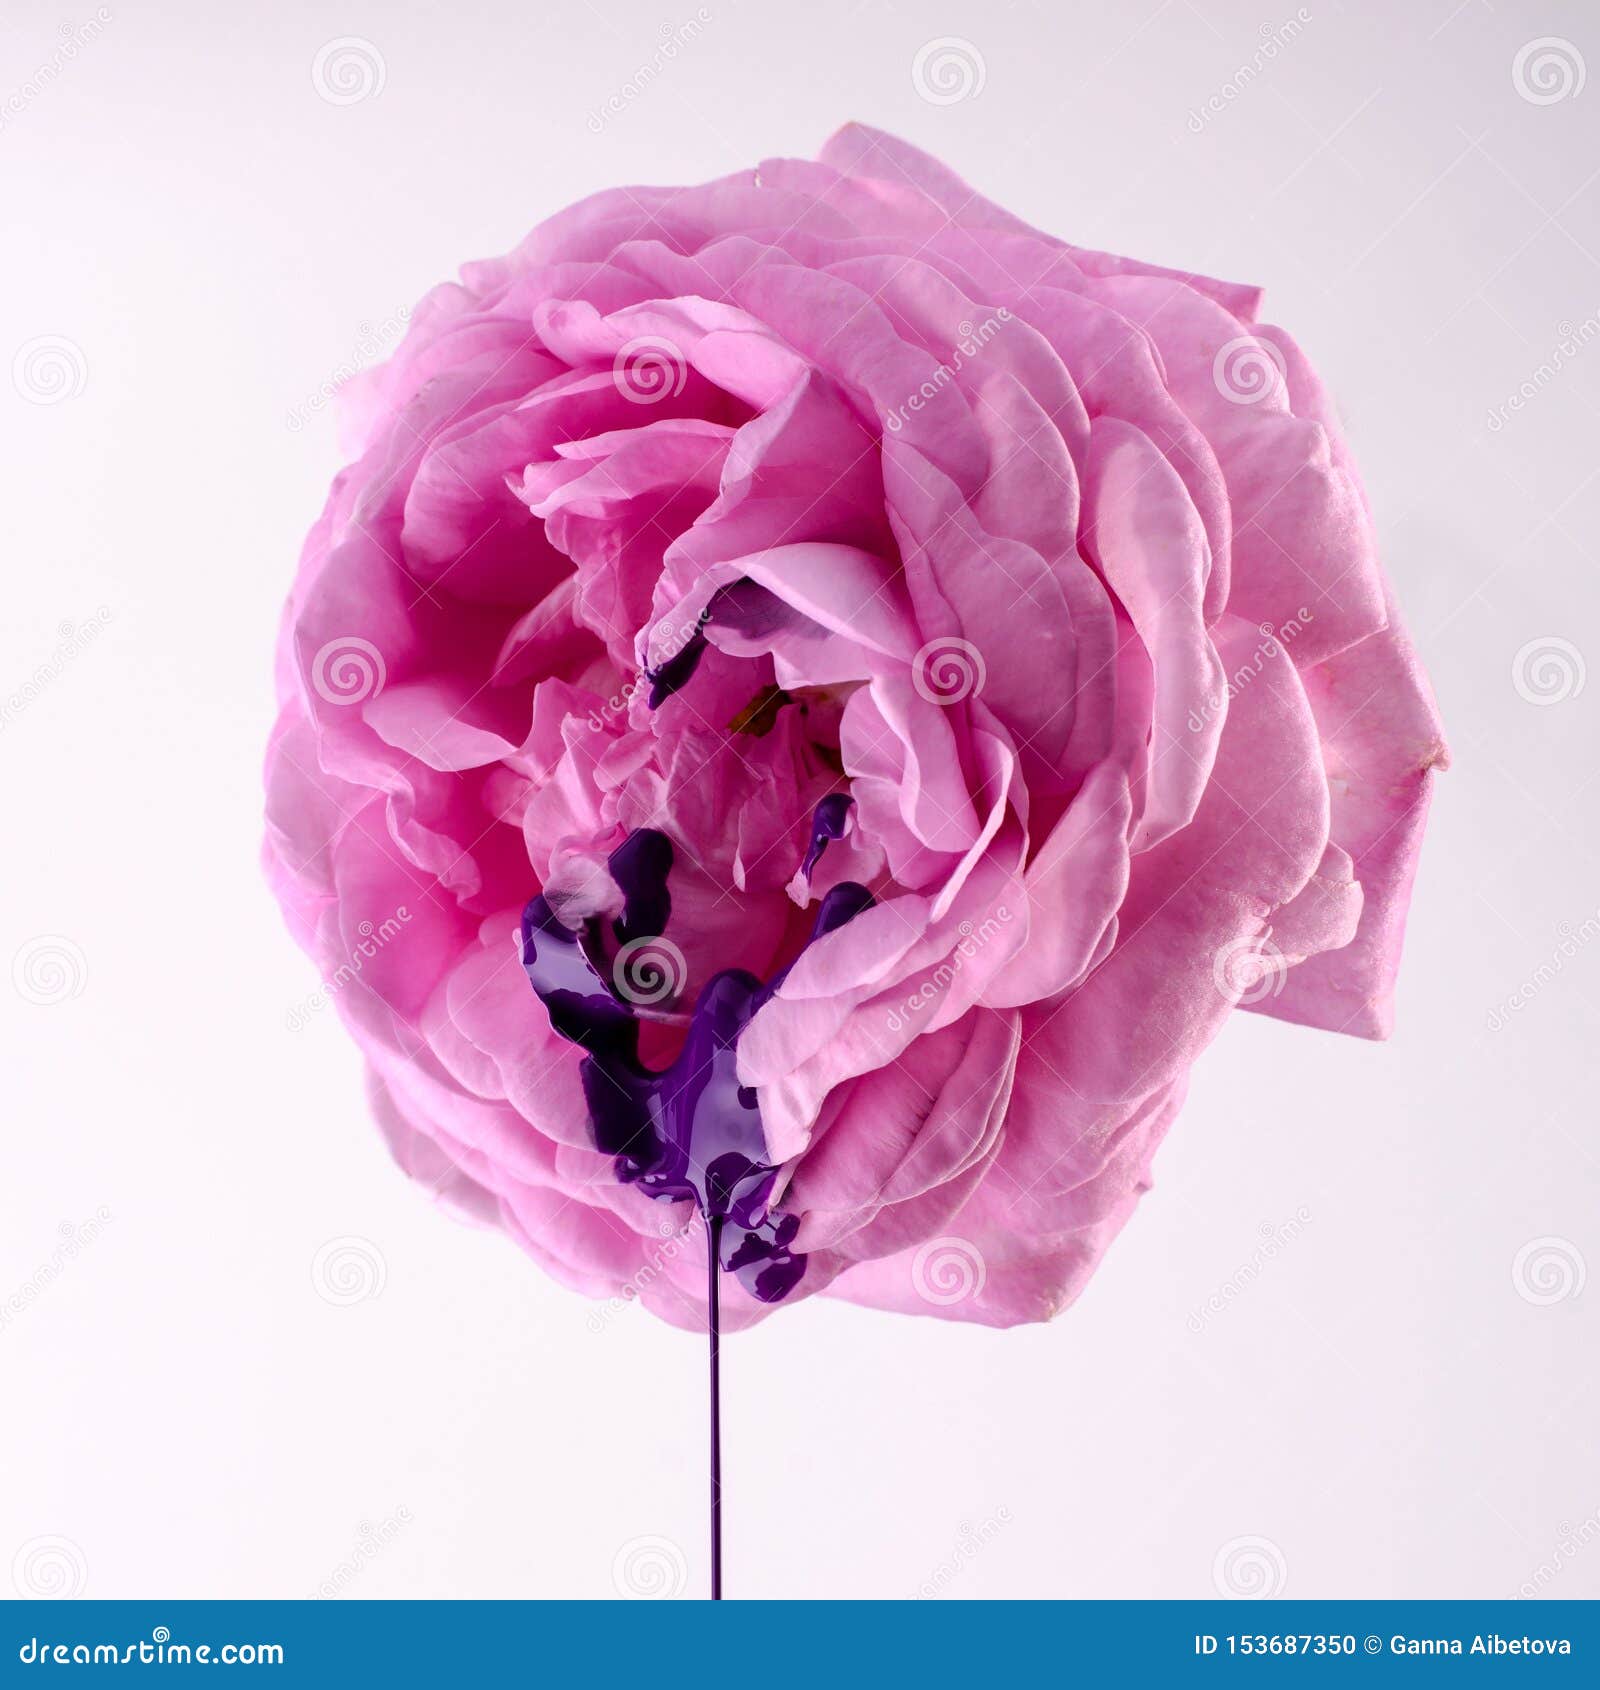 pink rose and violet paint. women`s health concept. flower as vagina 